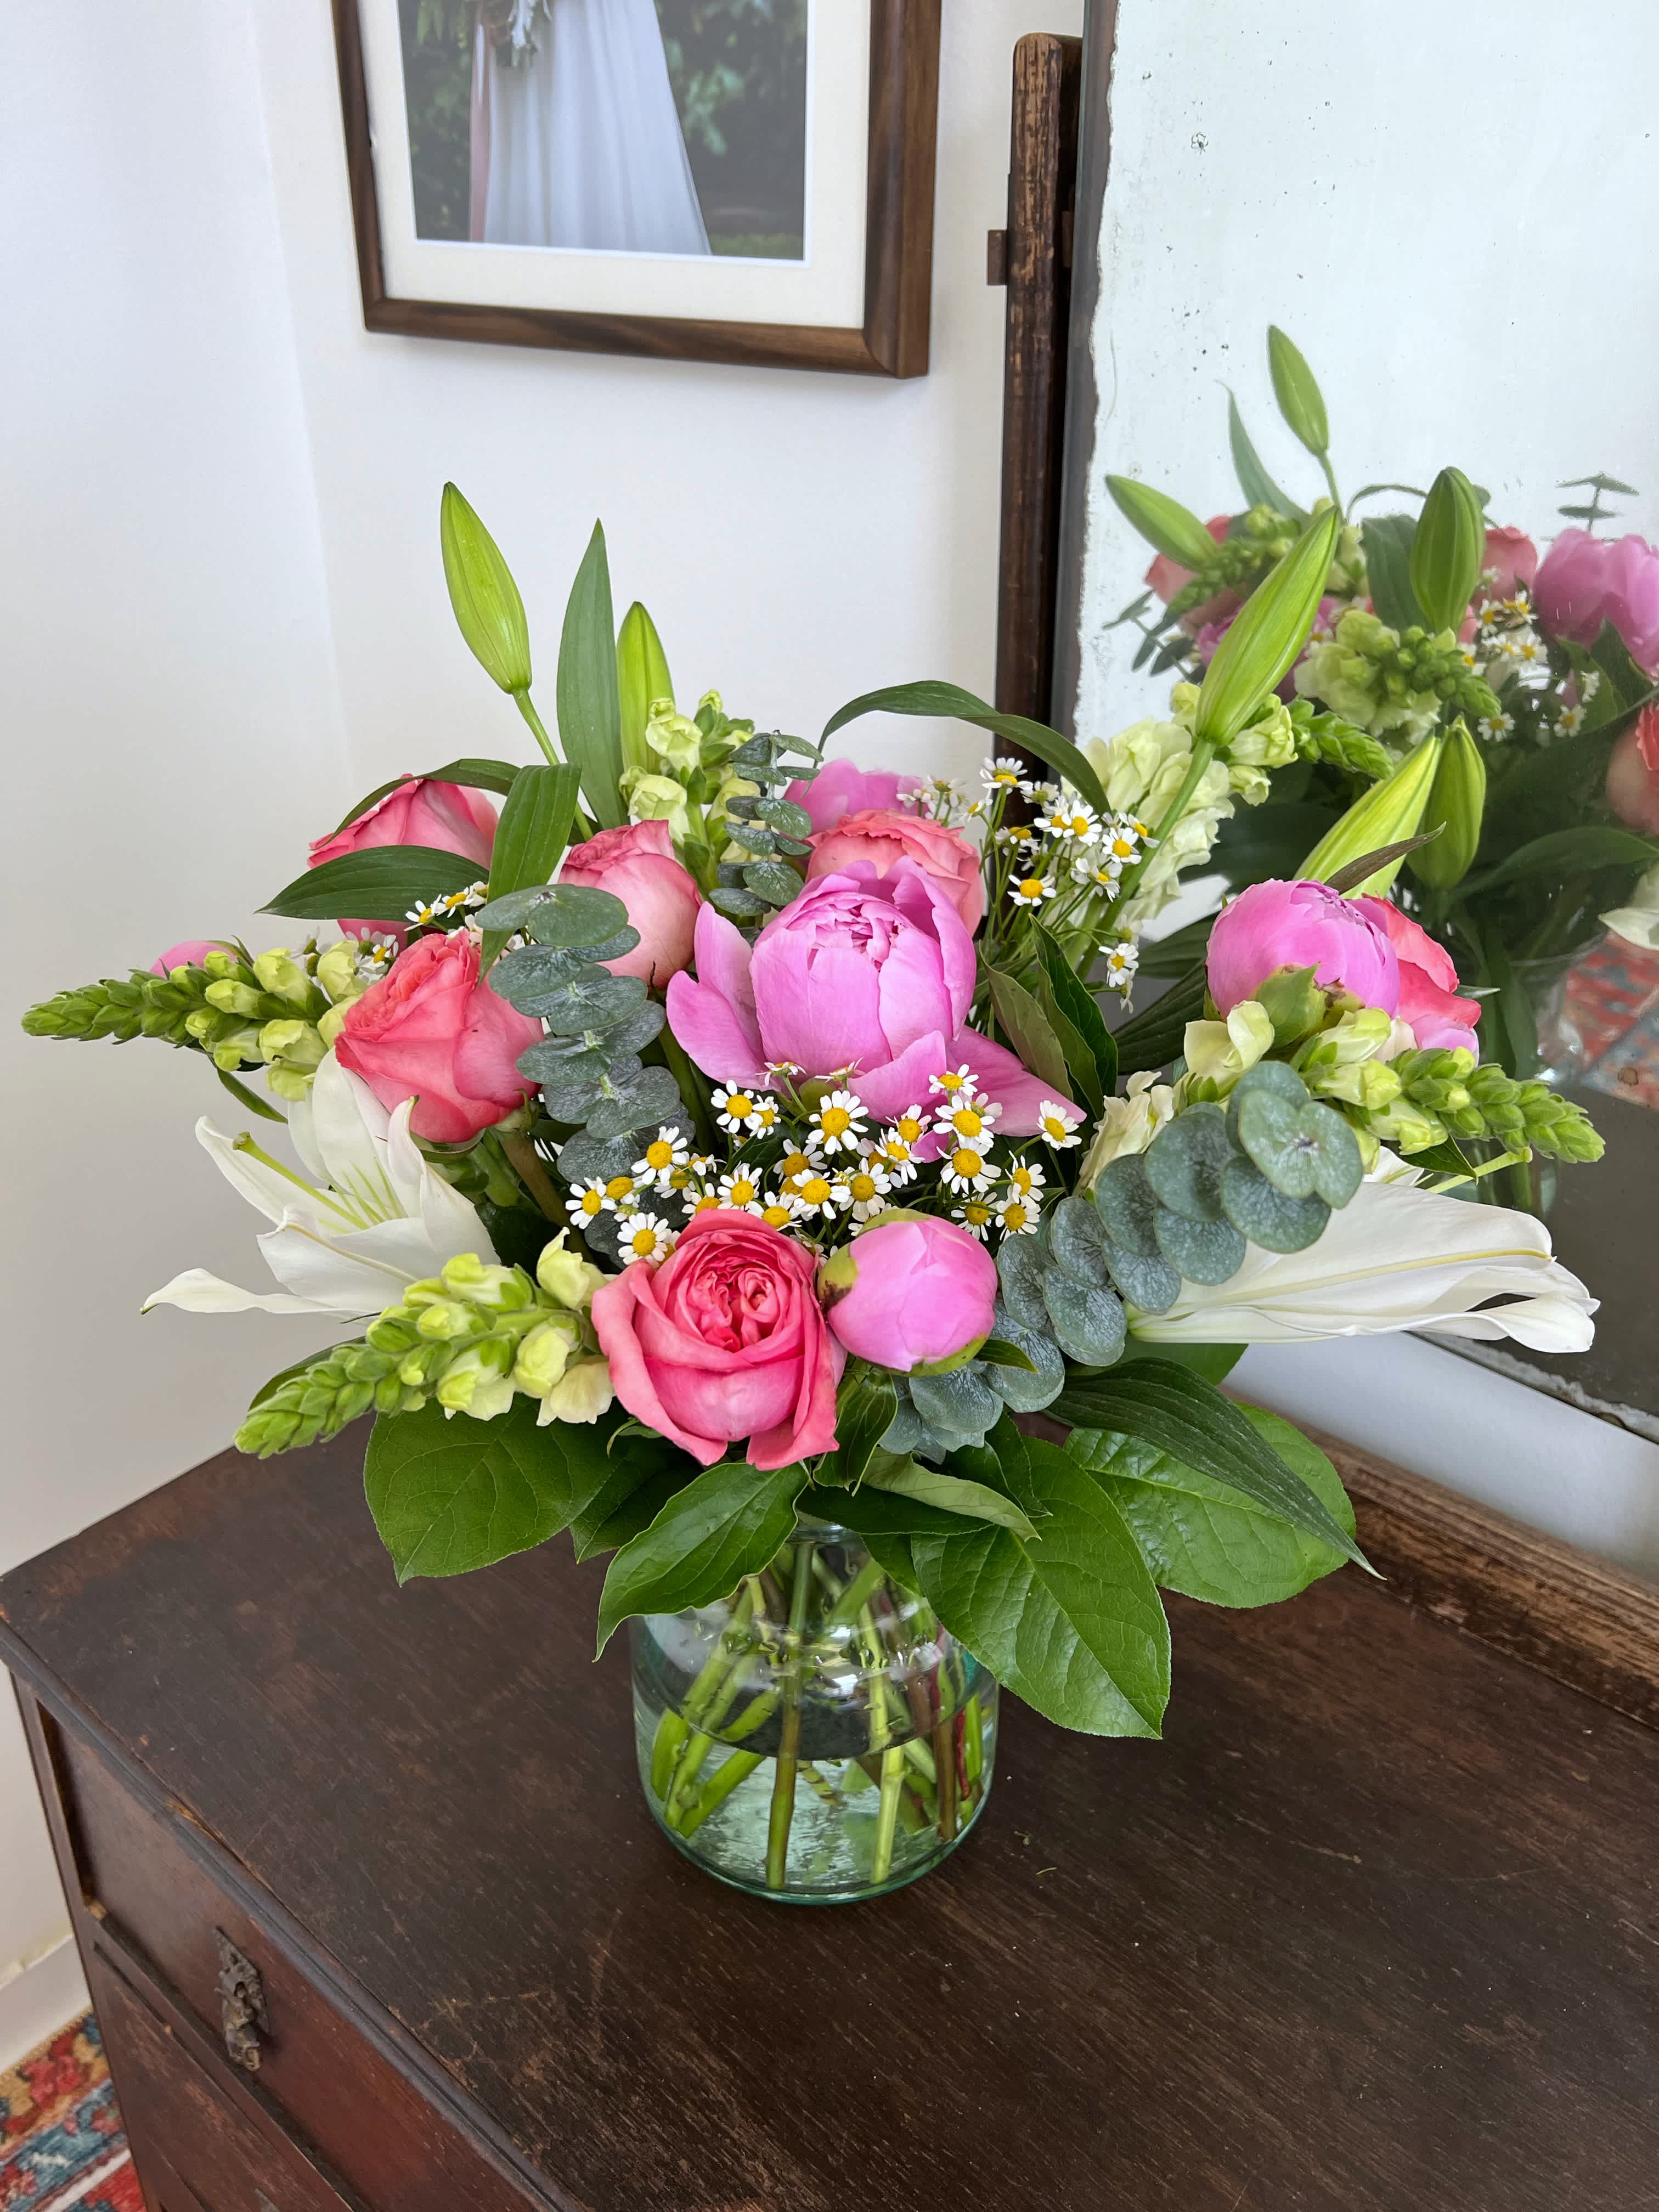 The Lynda - Meet the Lynda, a lush tall bouquet with fragrant orientals, peonies and roses to name a few!!